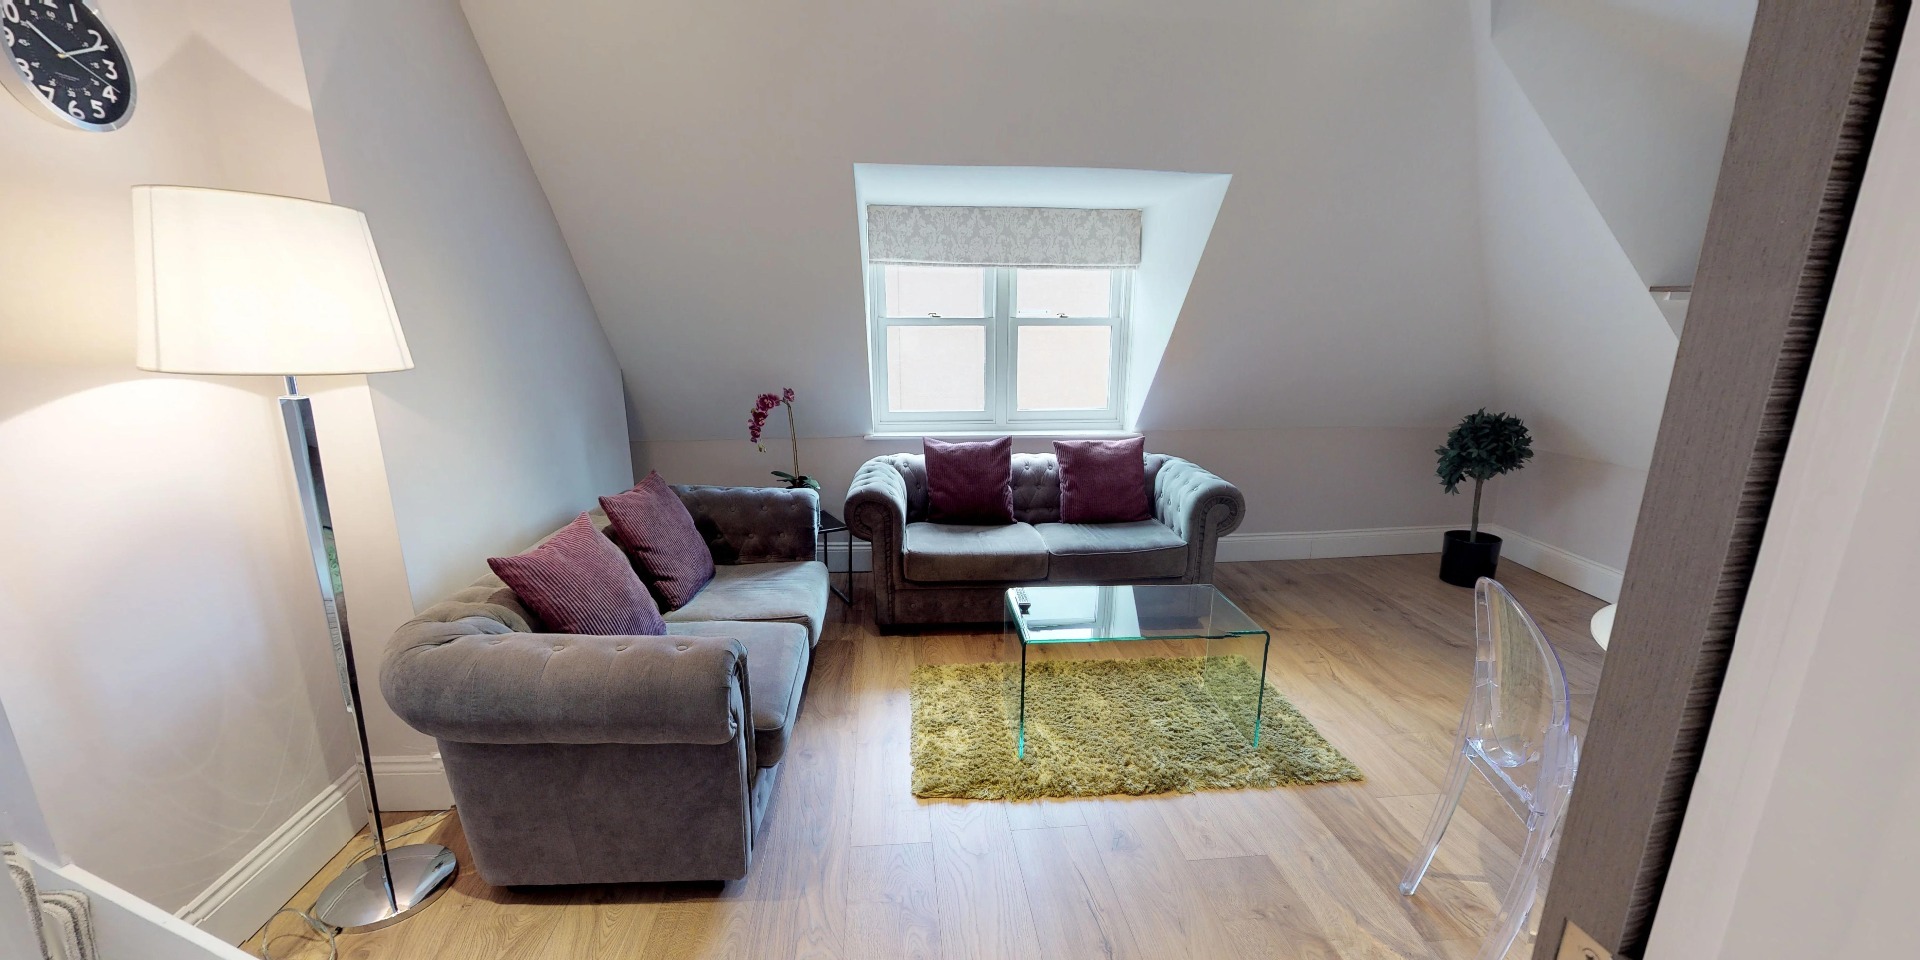 Harrogate Lifestyle offers stylish executive two bedroom two bathroom apartment for up to 4 people with double or twin bed set up facility. For Bookings Call now - 01423 568820